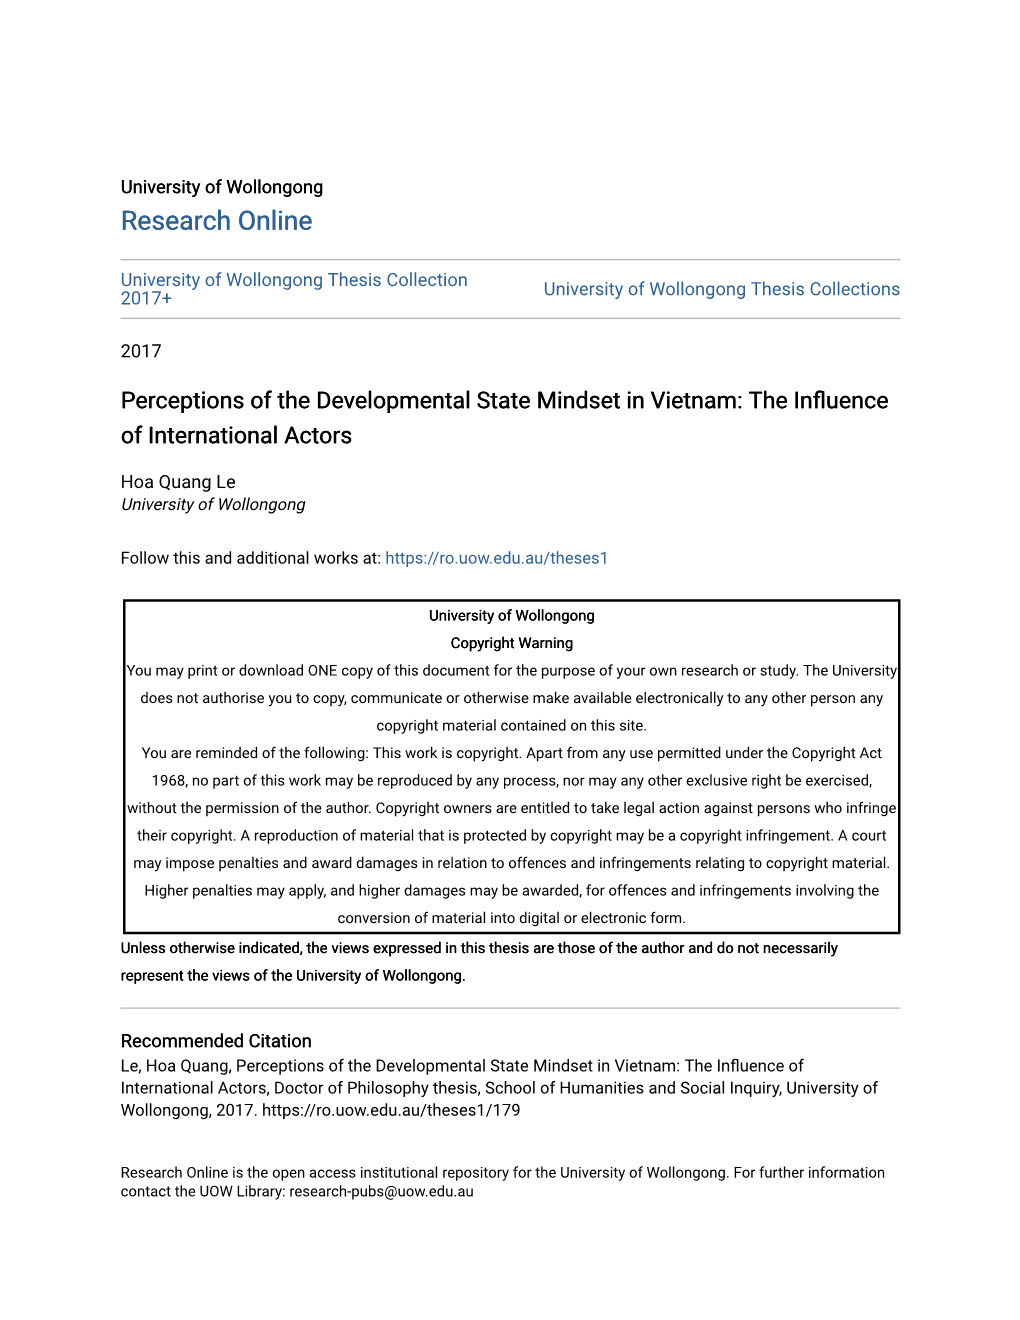 Perceptions of the Developmental State Mindset in Vietnam: the Influence of International Actors